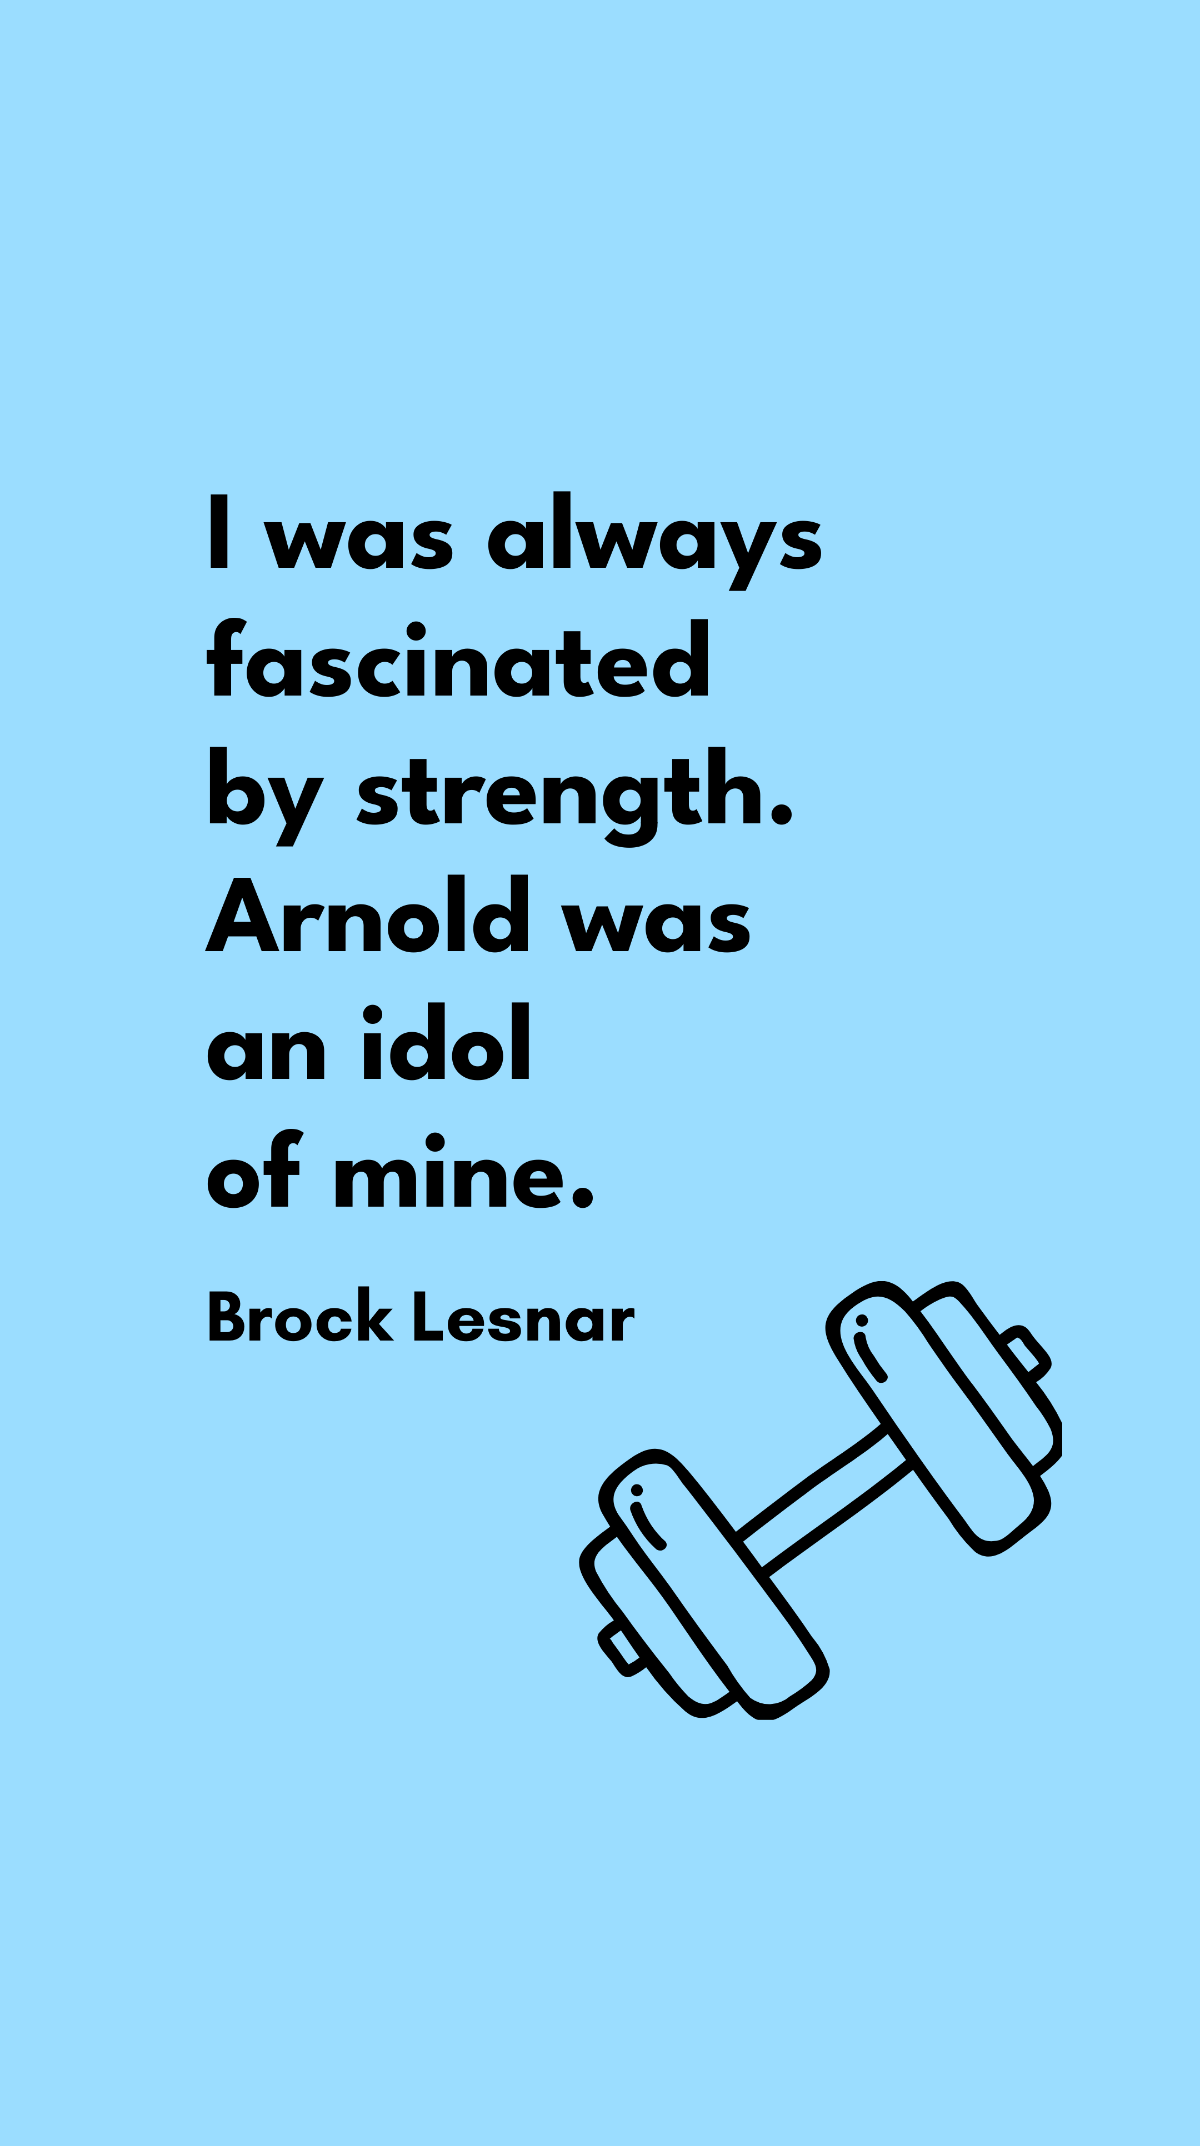 Brock Lesnar - I was always fascinated by strength. Arnold was an idol of mine. Template